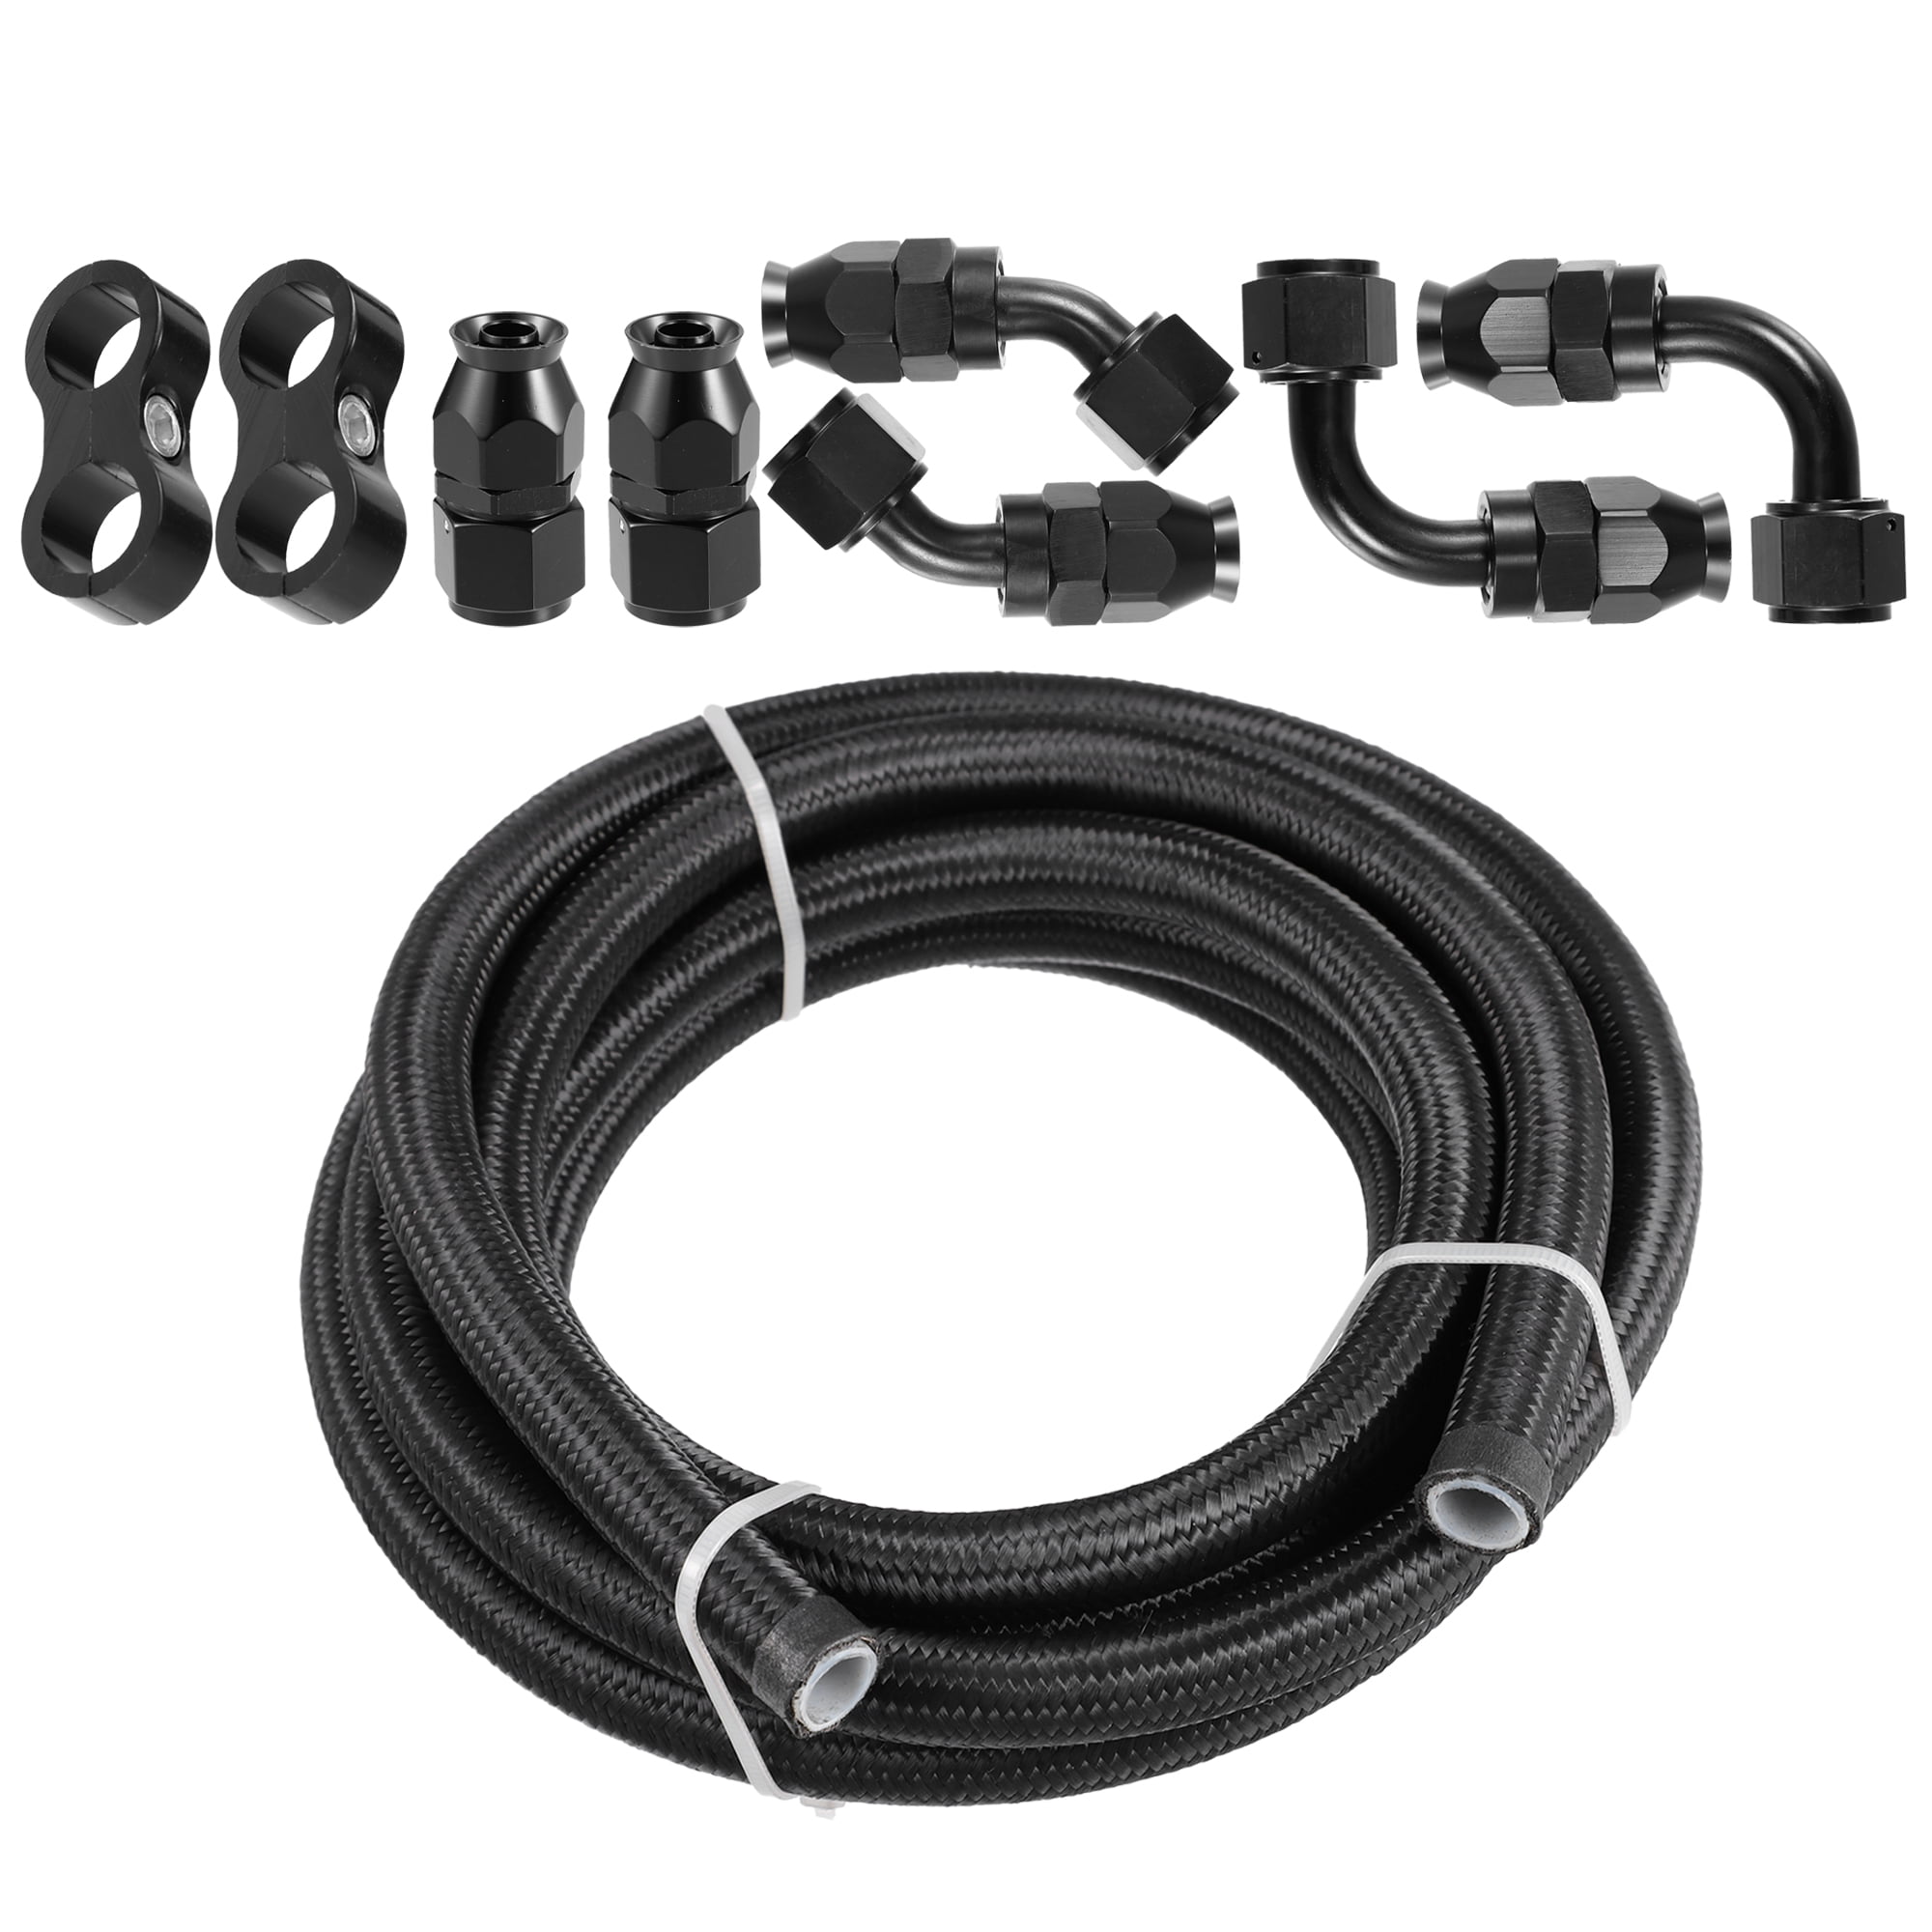 Unique Bargains Car Braided 10ft 1/4 Fuel Line with AN4 End Fitting for CPE Oil Gas Hose